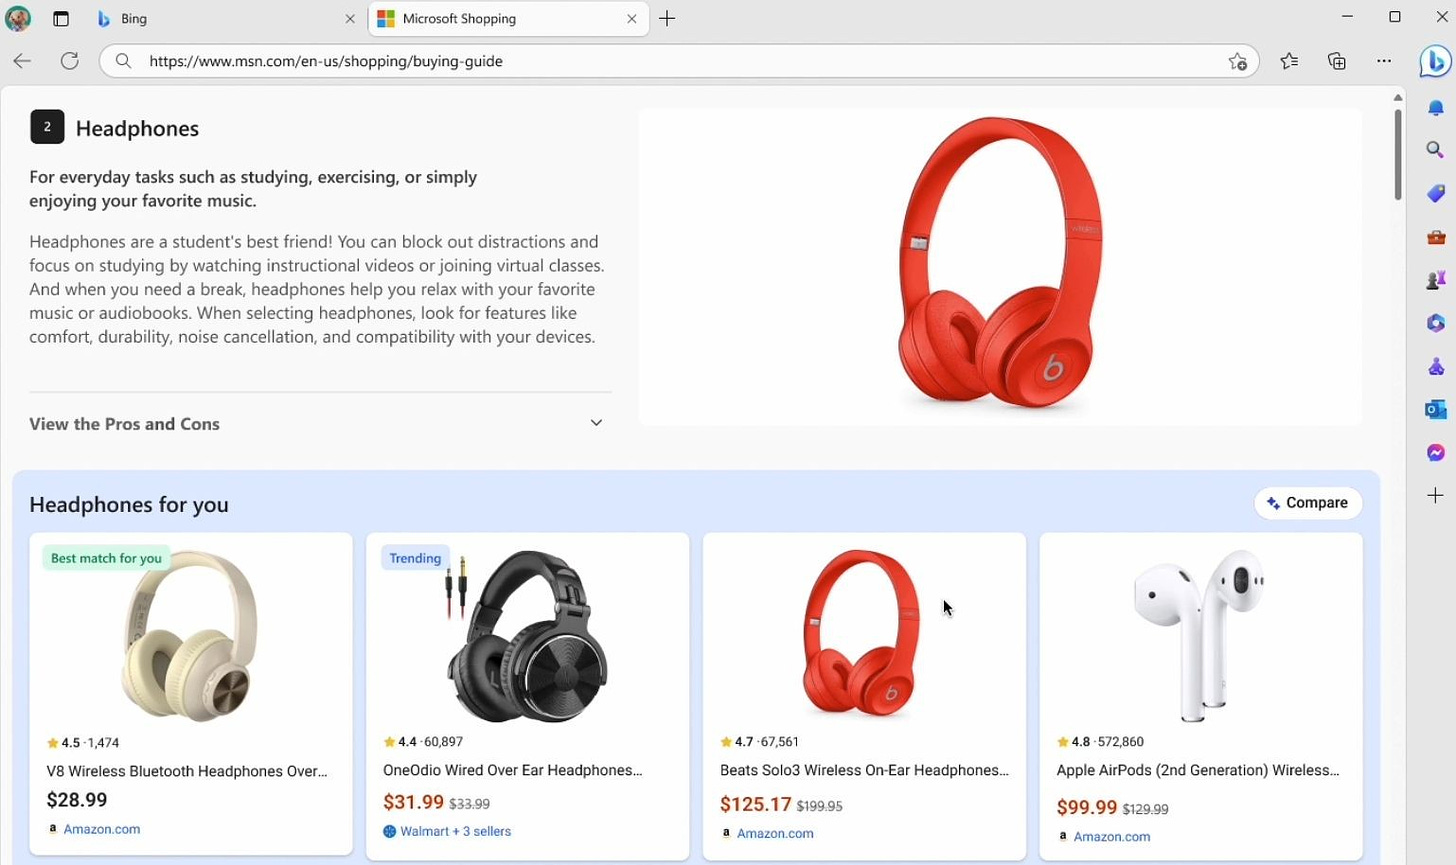 New AI-based Microsoft Shopping features added to Bing search, Bing Chat,  and Edge browser - Neowin